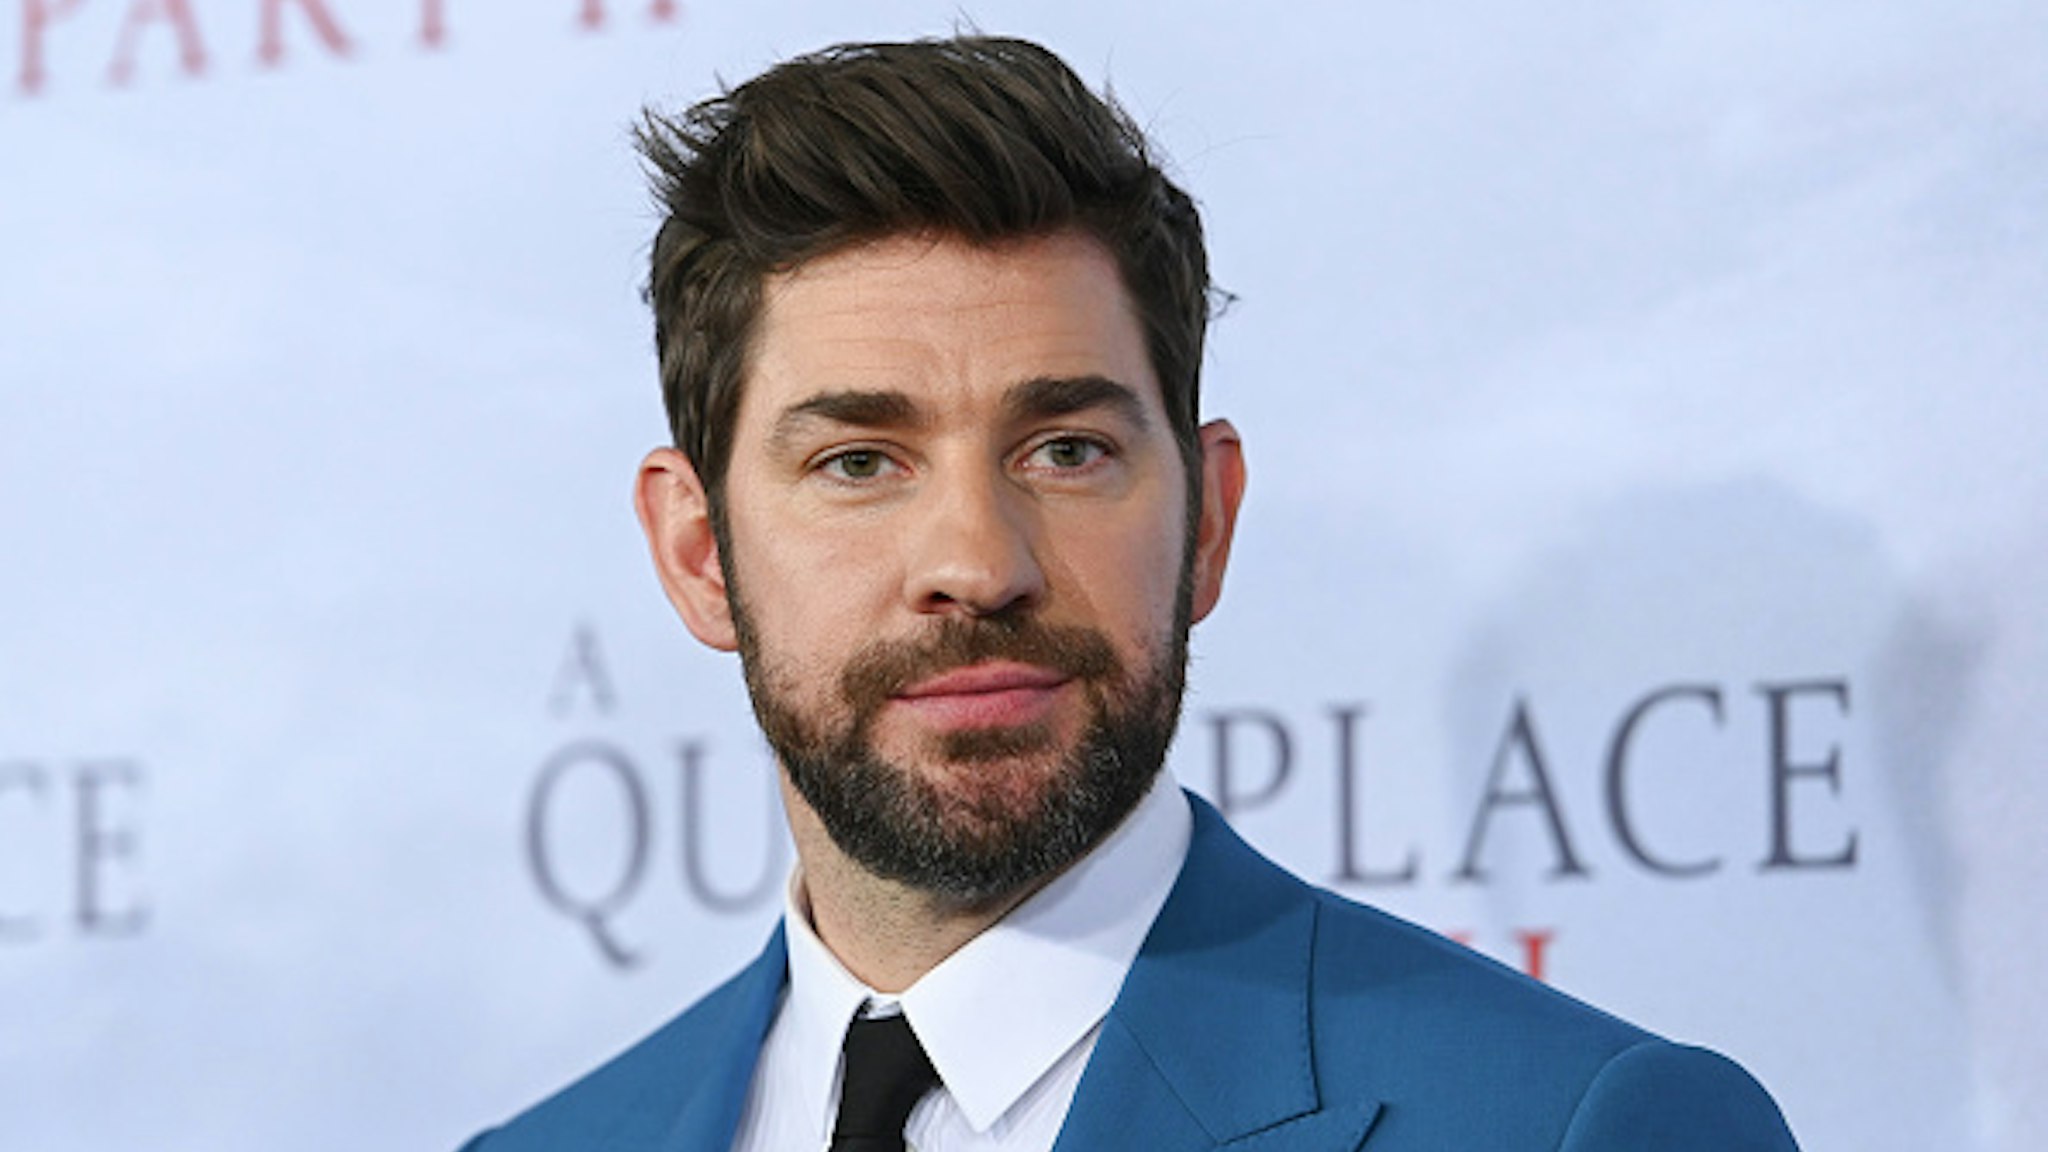 NEW YORK, NEW YORK - MARCH 08: Actor John Krasinski attends the "A Quiet Place Part II" World Premiere at Rose Theater, Jazz at Lincoln Center on March 08, 2020 in New York City.